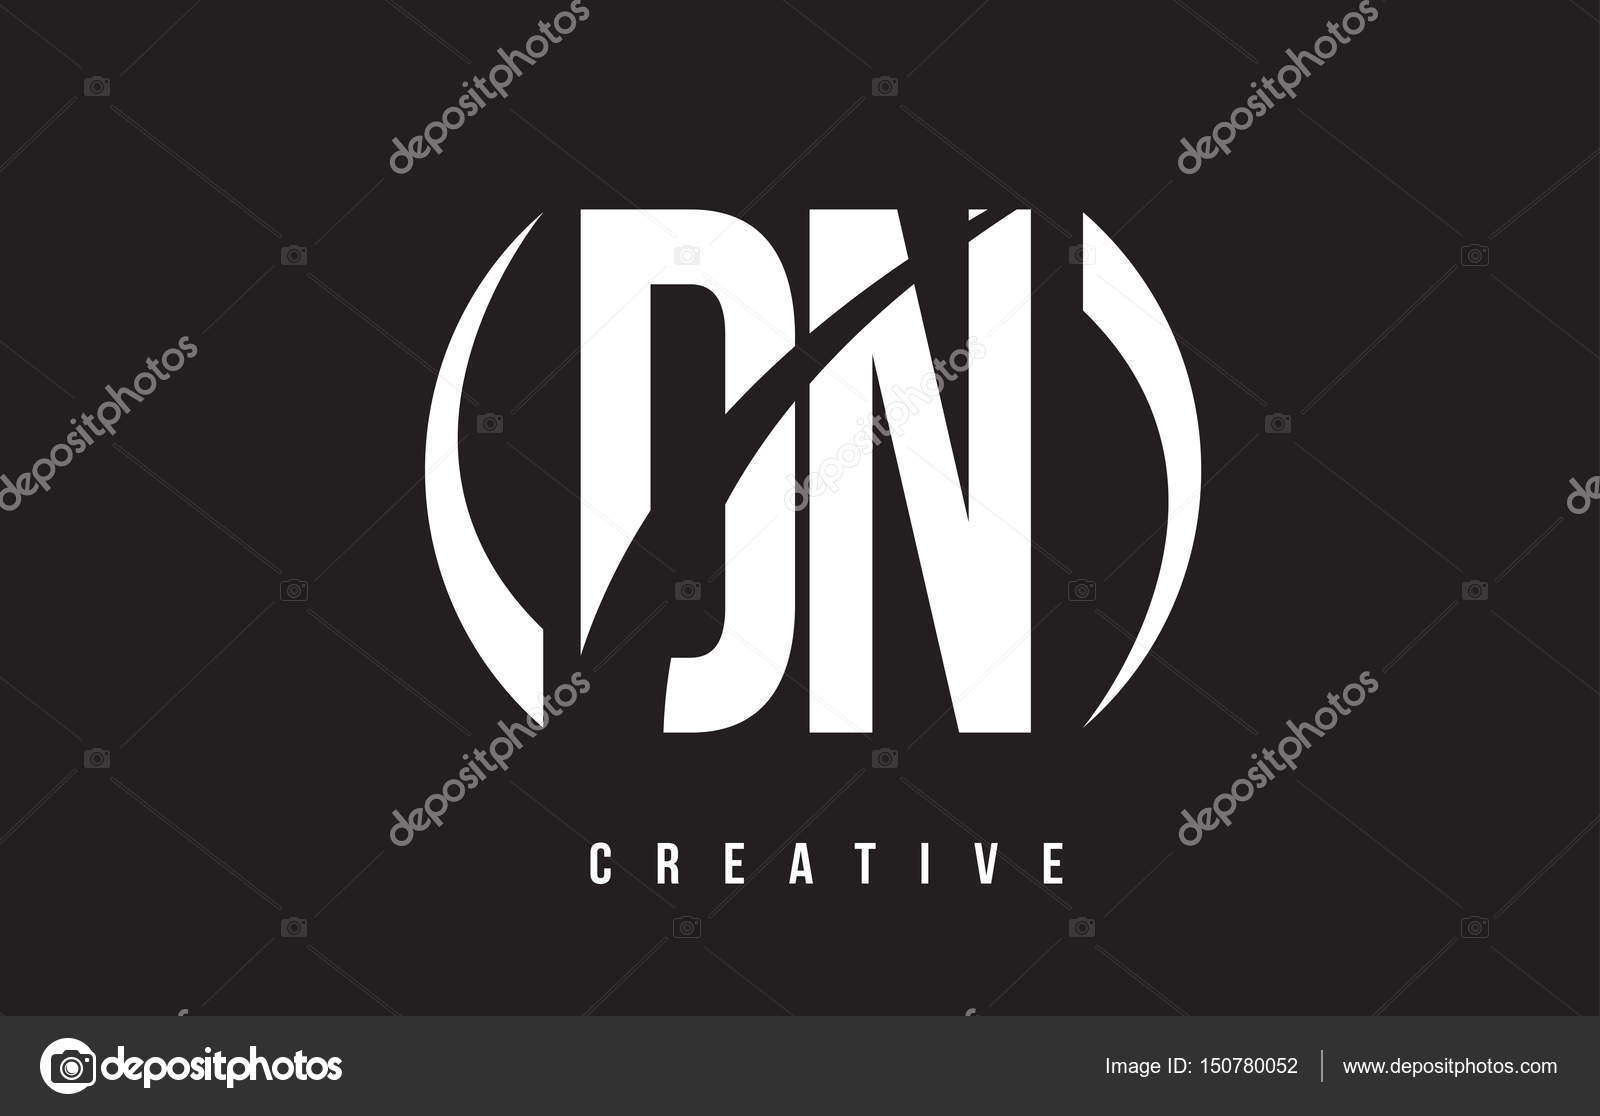 Dn Logo Cliparts, Stock Vector and Royalty Free Dn Logo Illustrations